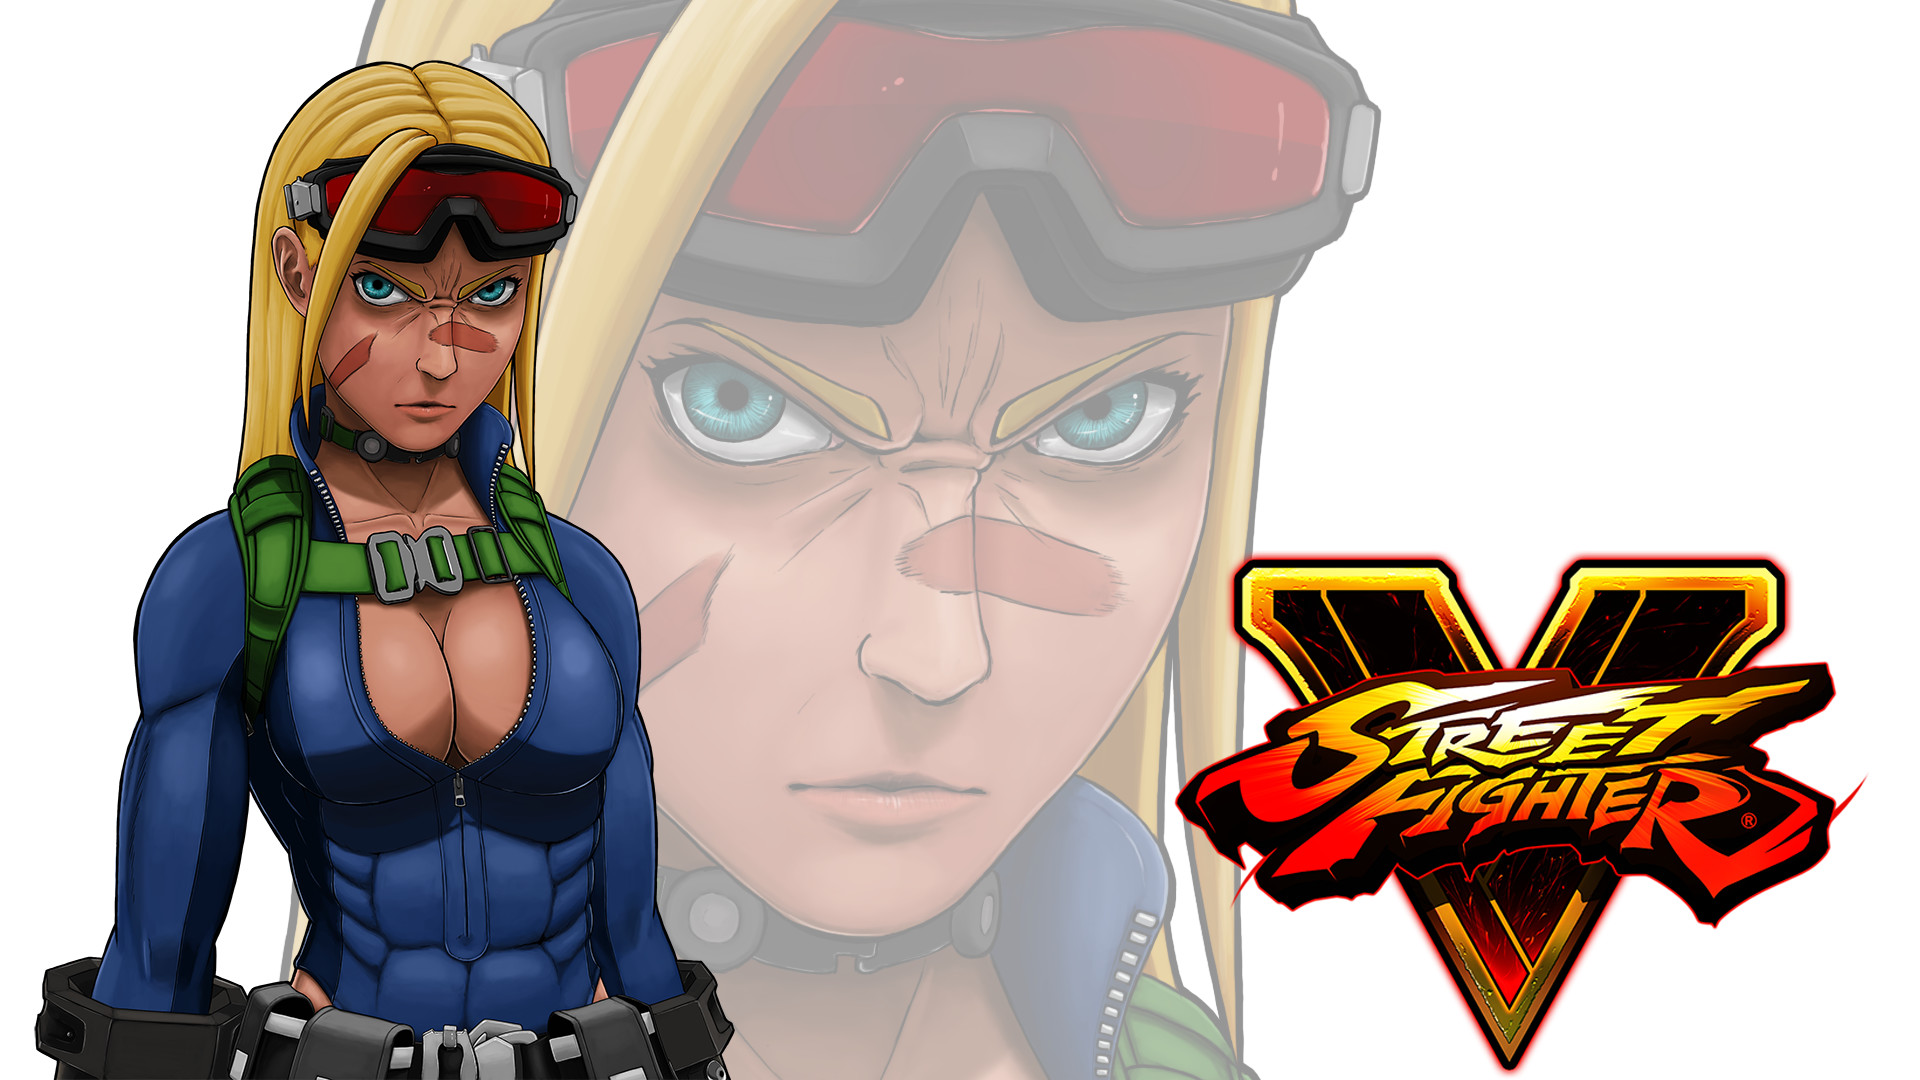 1920x1080 hes6789 7 2 Street Fighter 5 Cammy Wallpaper by Misucra